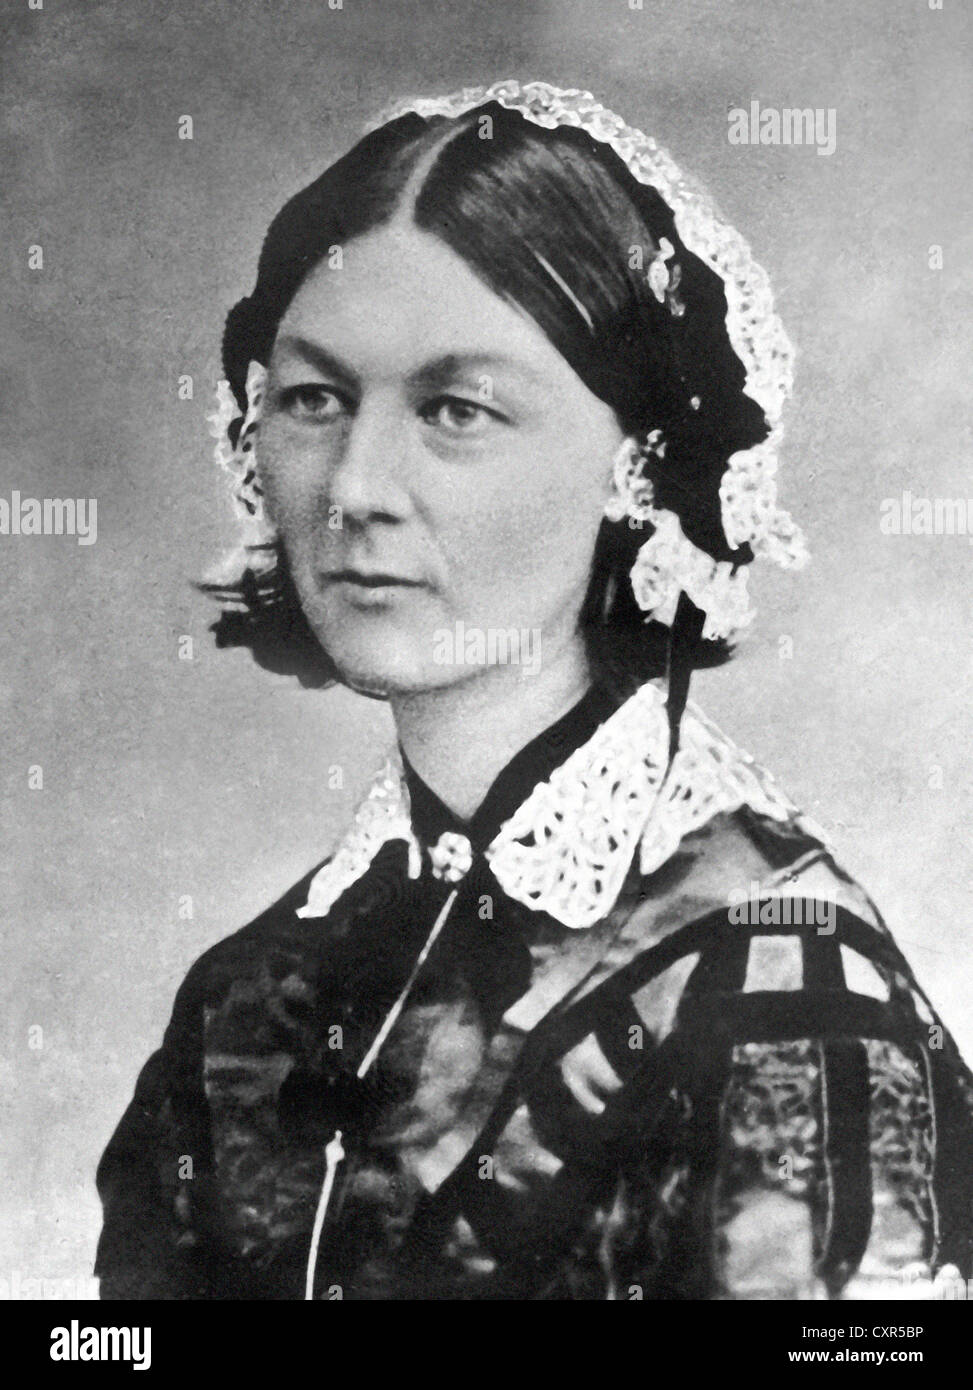 Florence Nightingale is famous for her nursing work during the Crimean War (1854 - 56). From the archives of Press Portrait Service (formerly Press Portrait Bureau) Stock Photo